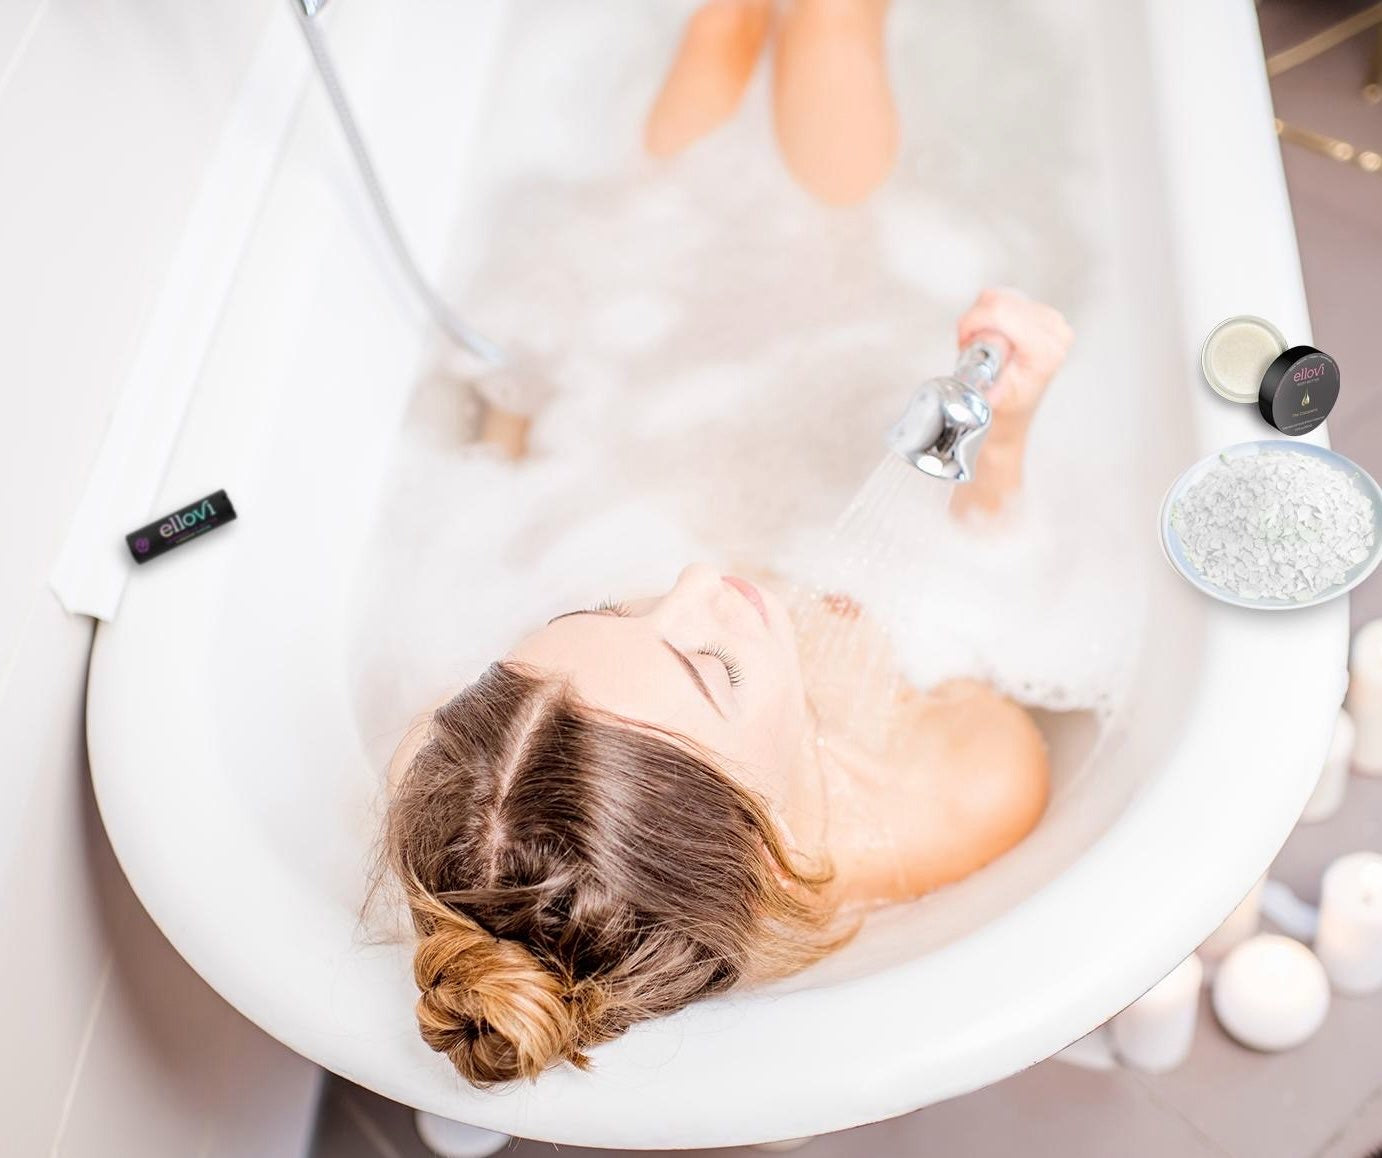 Bathing Ritual: Re-learning ancient self care